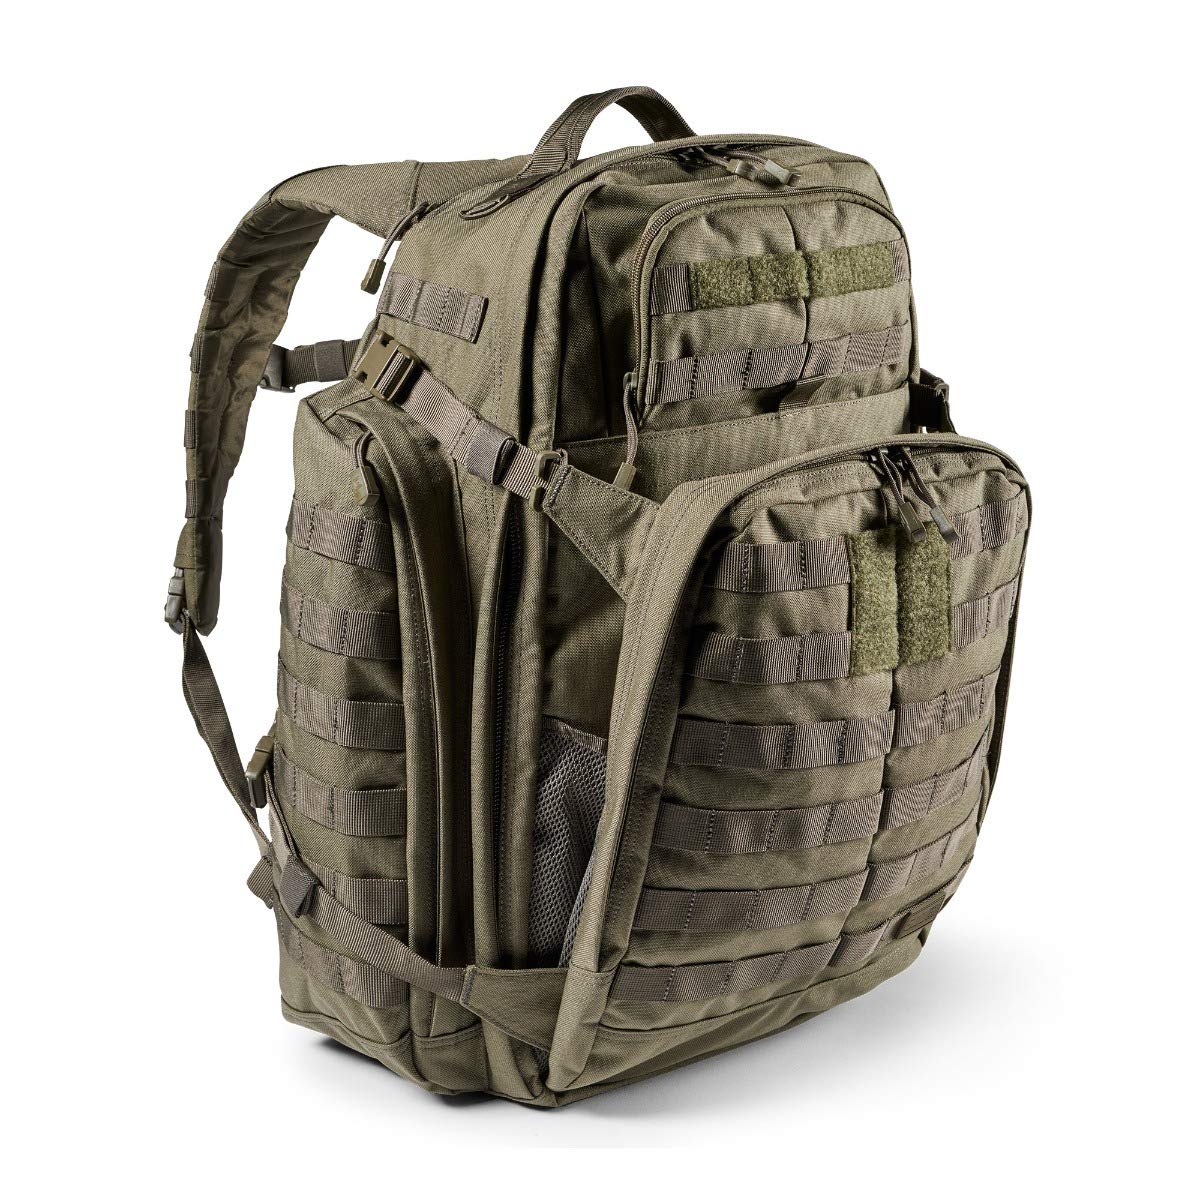 5.11 Tactical Backpack‚ Rush 72 2.0‚ Military Molle Pack, CCW and Laptop Compartment, 55 Liter, Large, Style 56565‚ Ranger Green